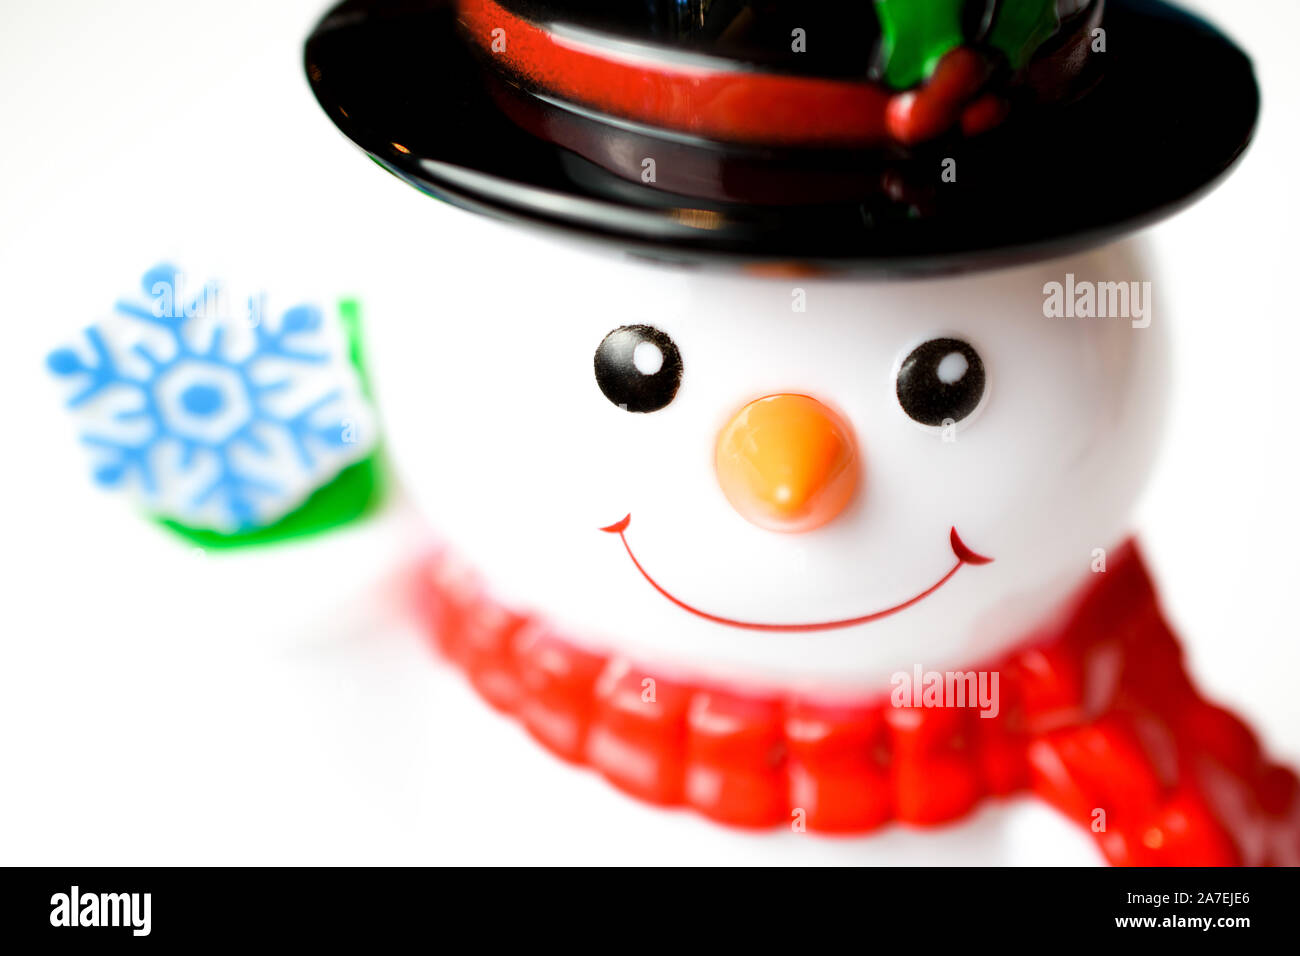 Closeup of adorable glass figurine snowman wearing a scarf and hat holding up a blue snowflake Stock Photo